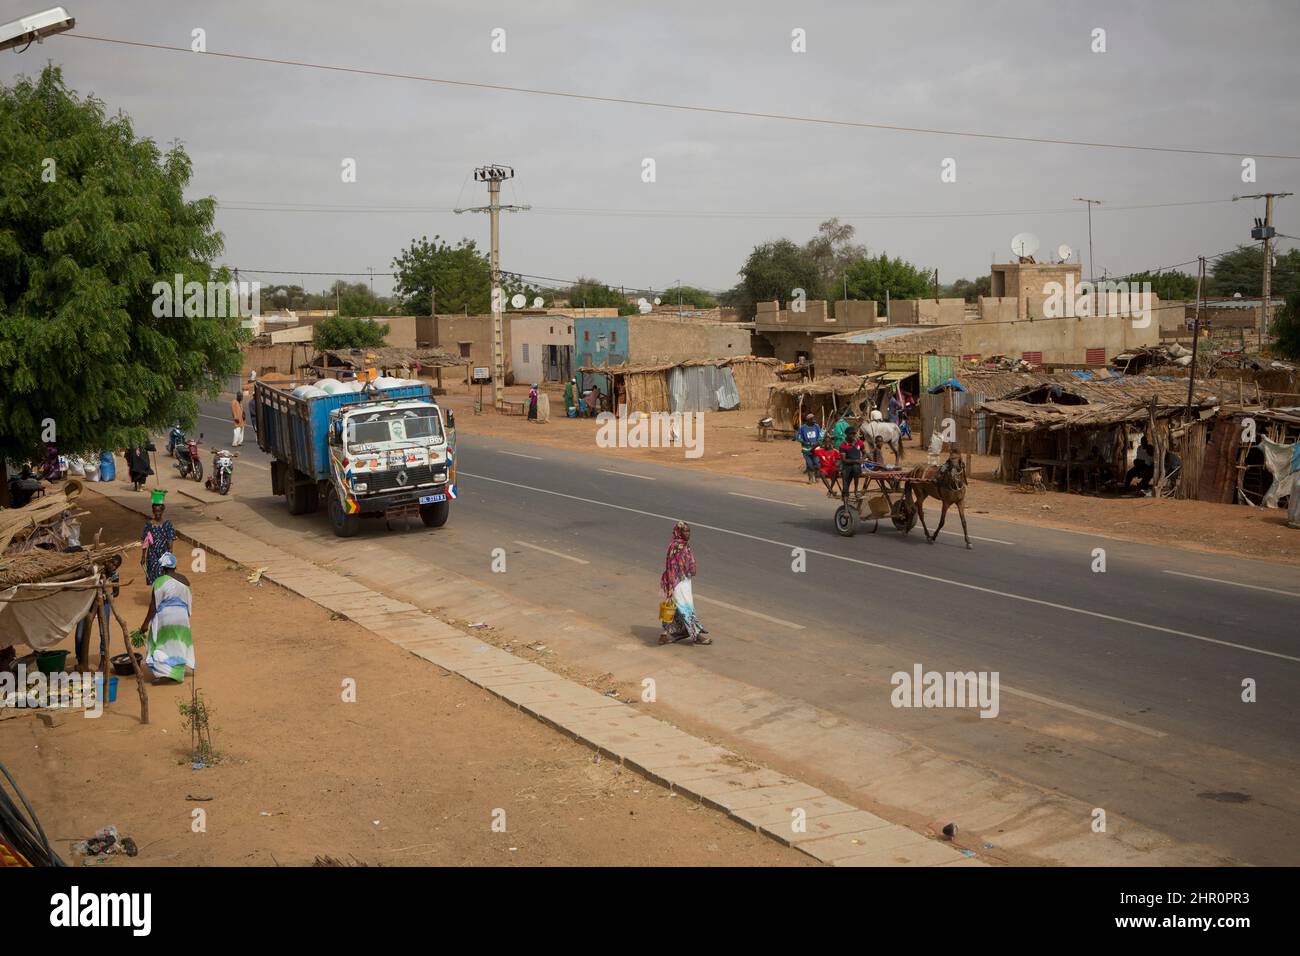 A modern paved roadway stretches through a small town in northern Senegal, West Africa. Stock Photo